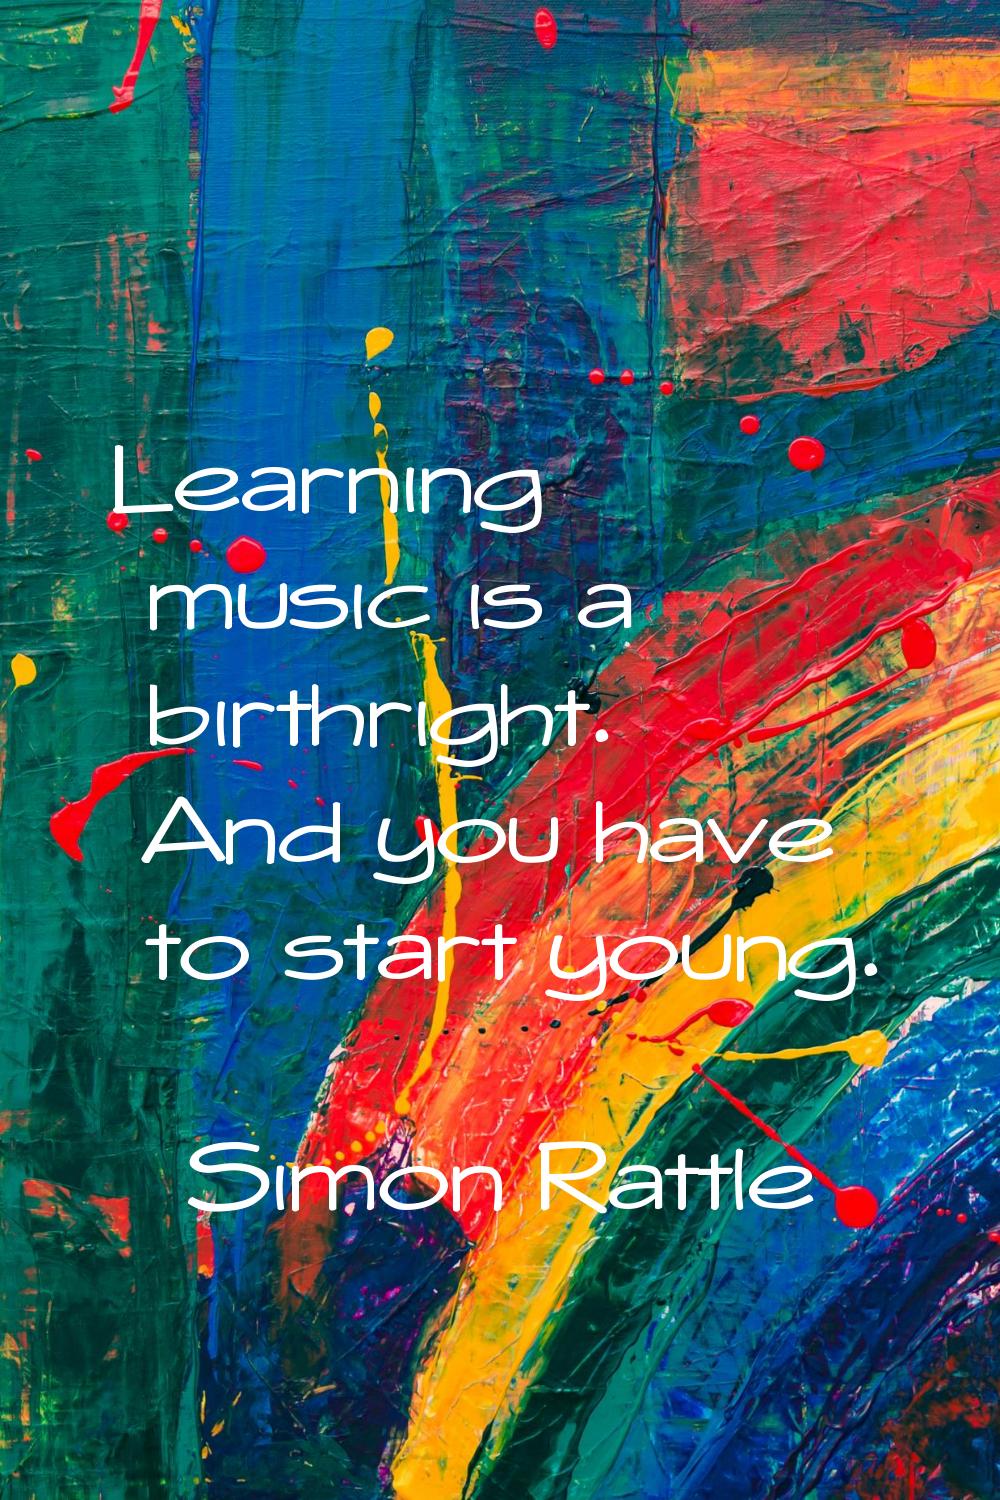 Learning music is a birthright. And you have to start young.